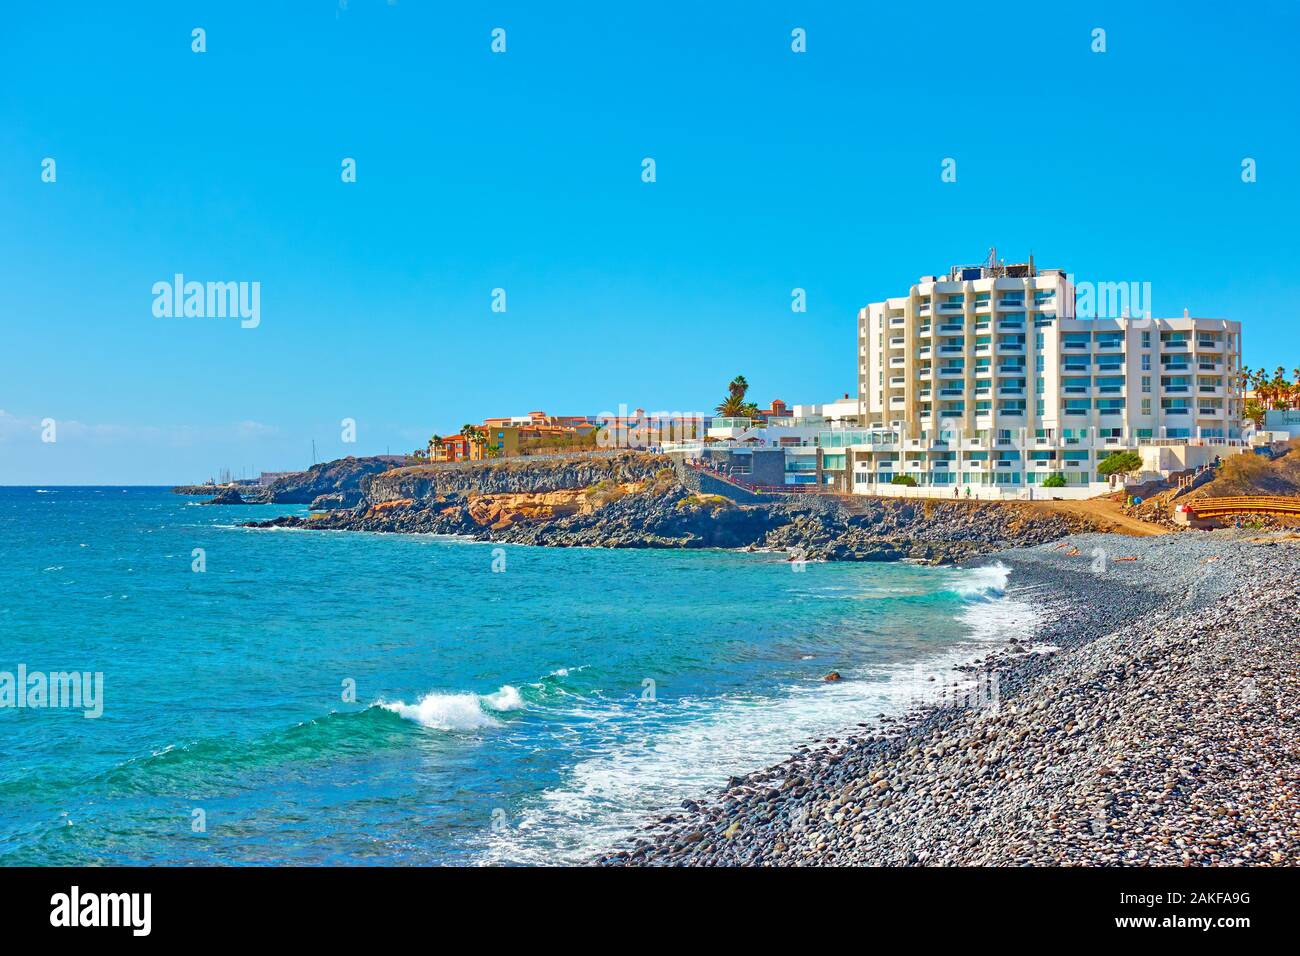 The Atlantic Ocean and resort hotels on the coast of Tenerife,  The Canary Islands Stock Photo